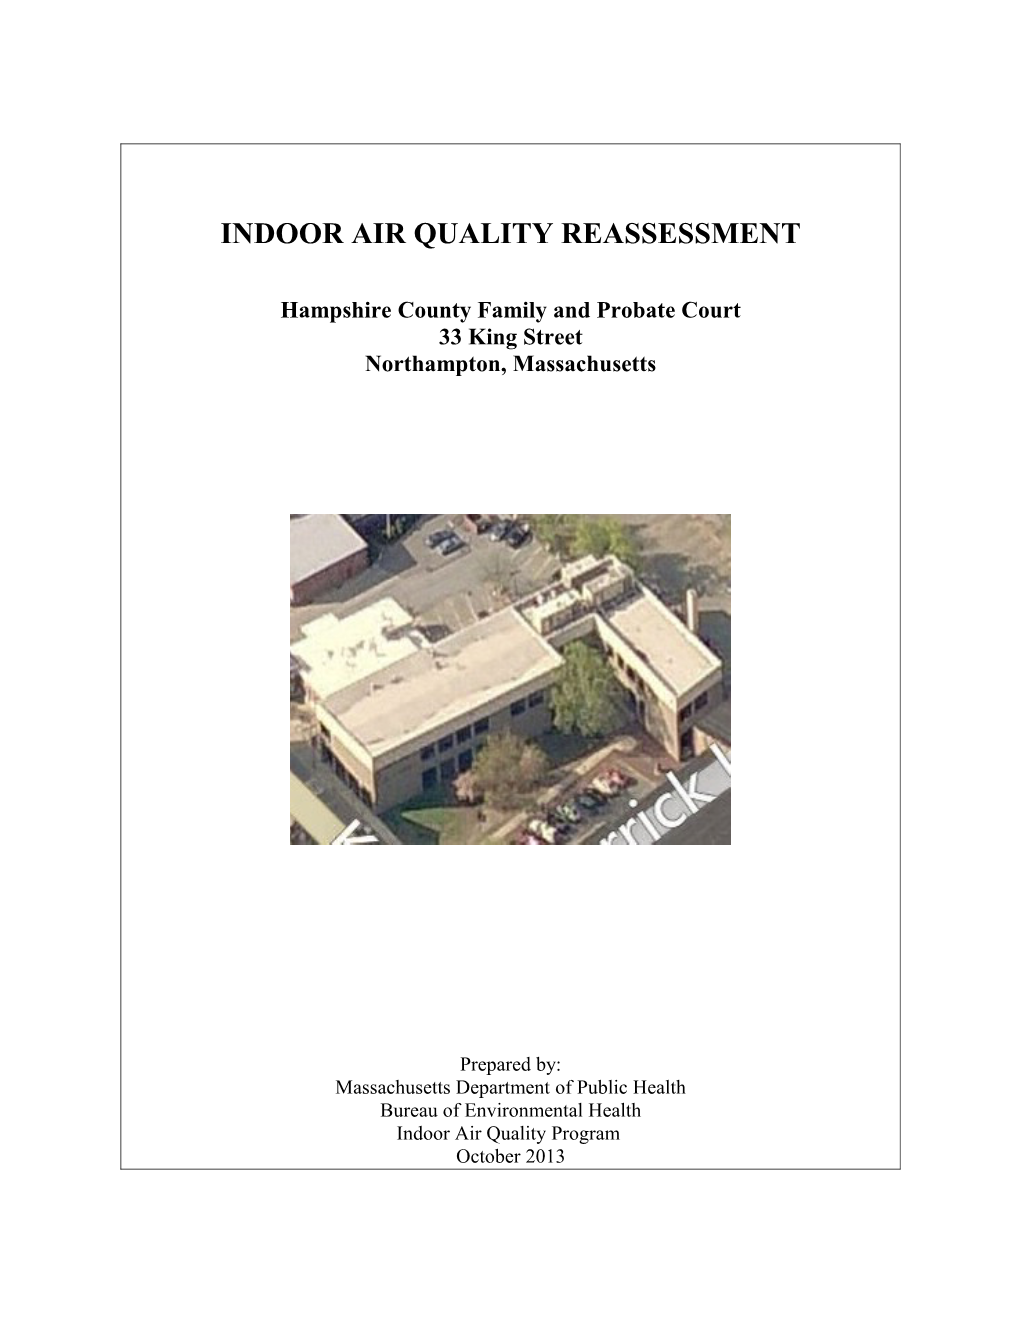 Indoor Air Quality Reassessment - Hampshire County Family and Probate Court, Northampton